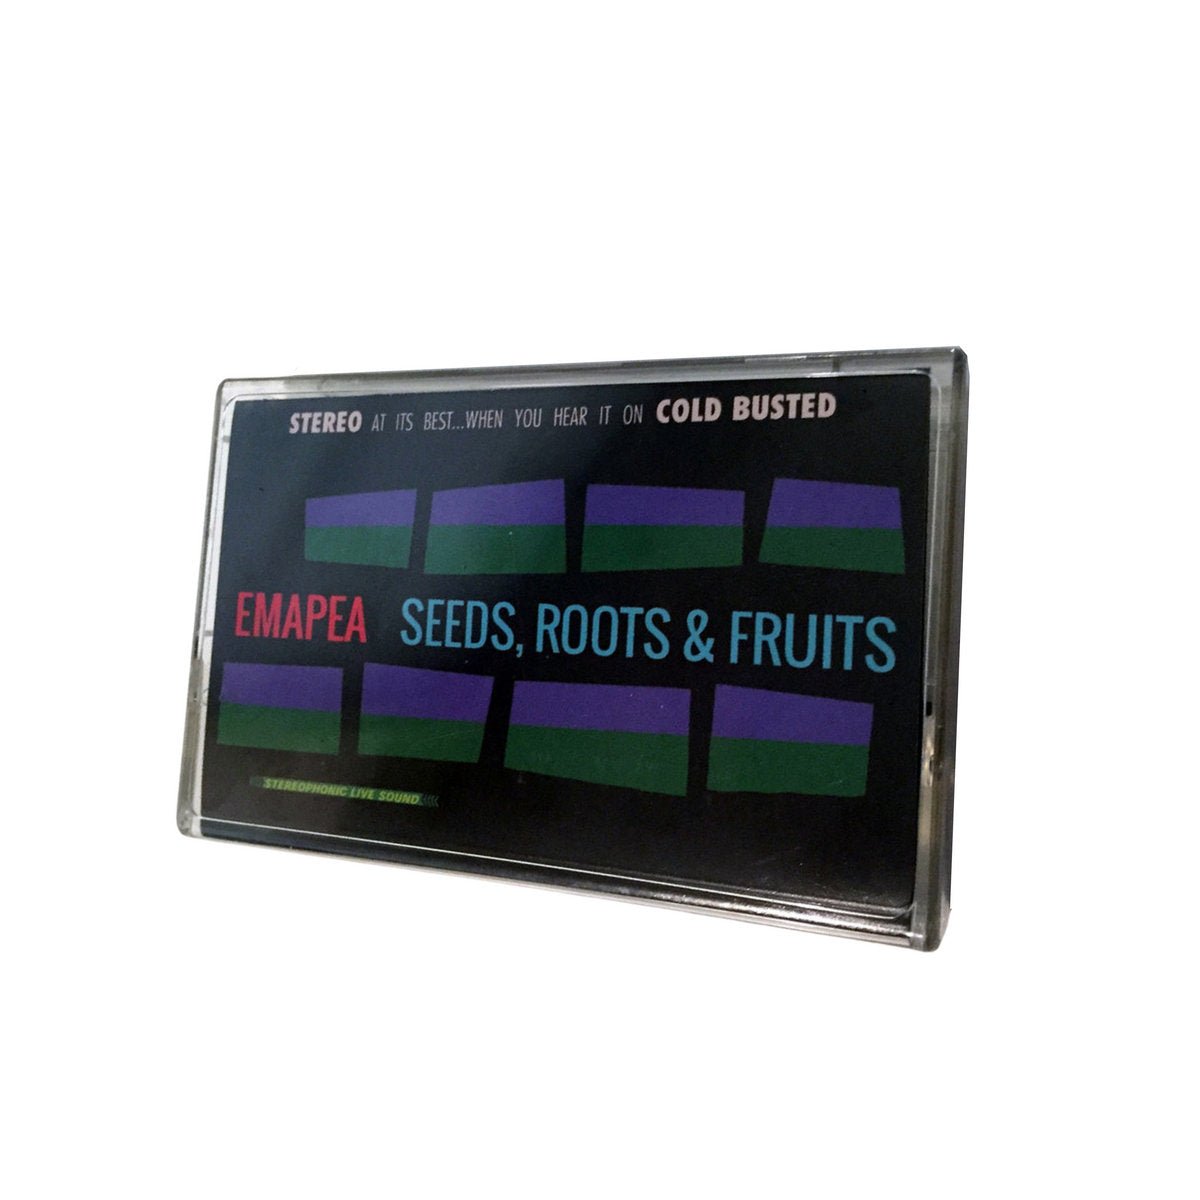 Emapea - Seeds, Roots & Fruits - Limited Edition Cassette - Cold Busted